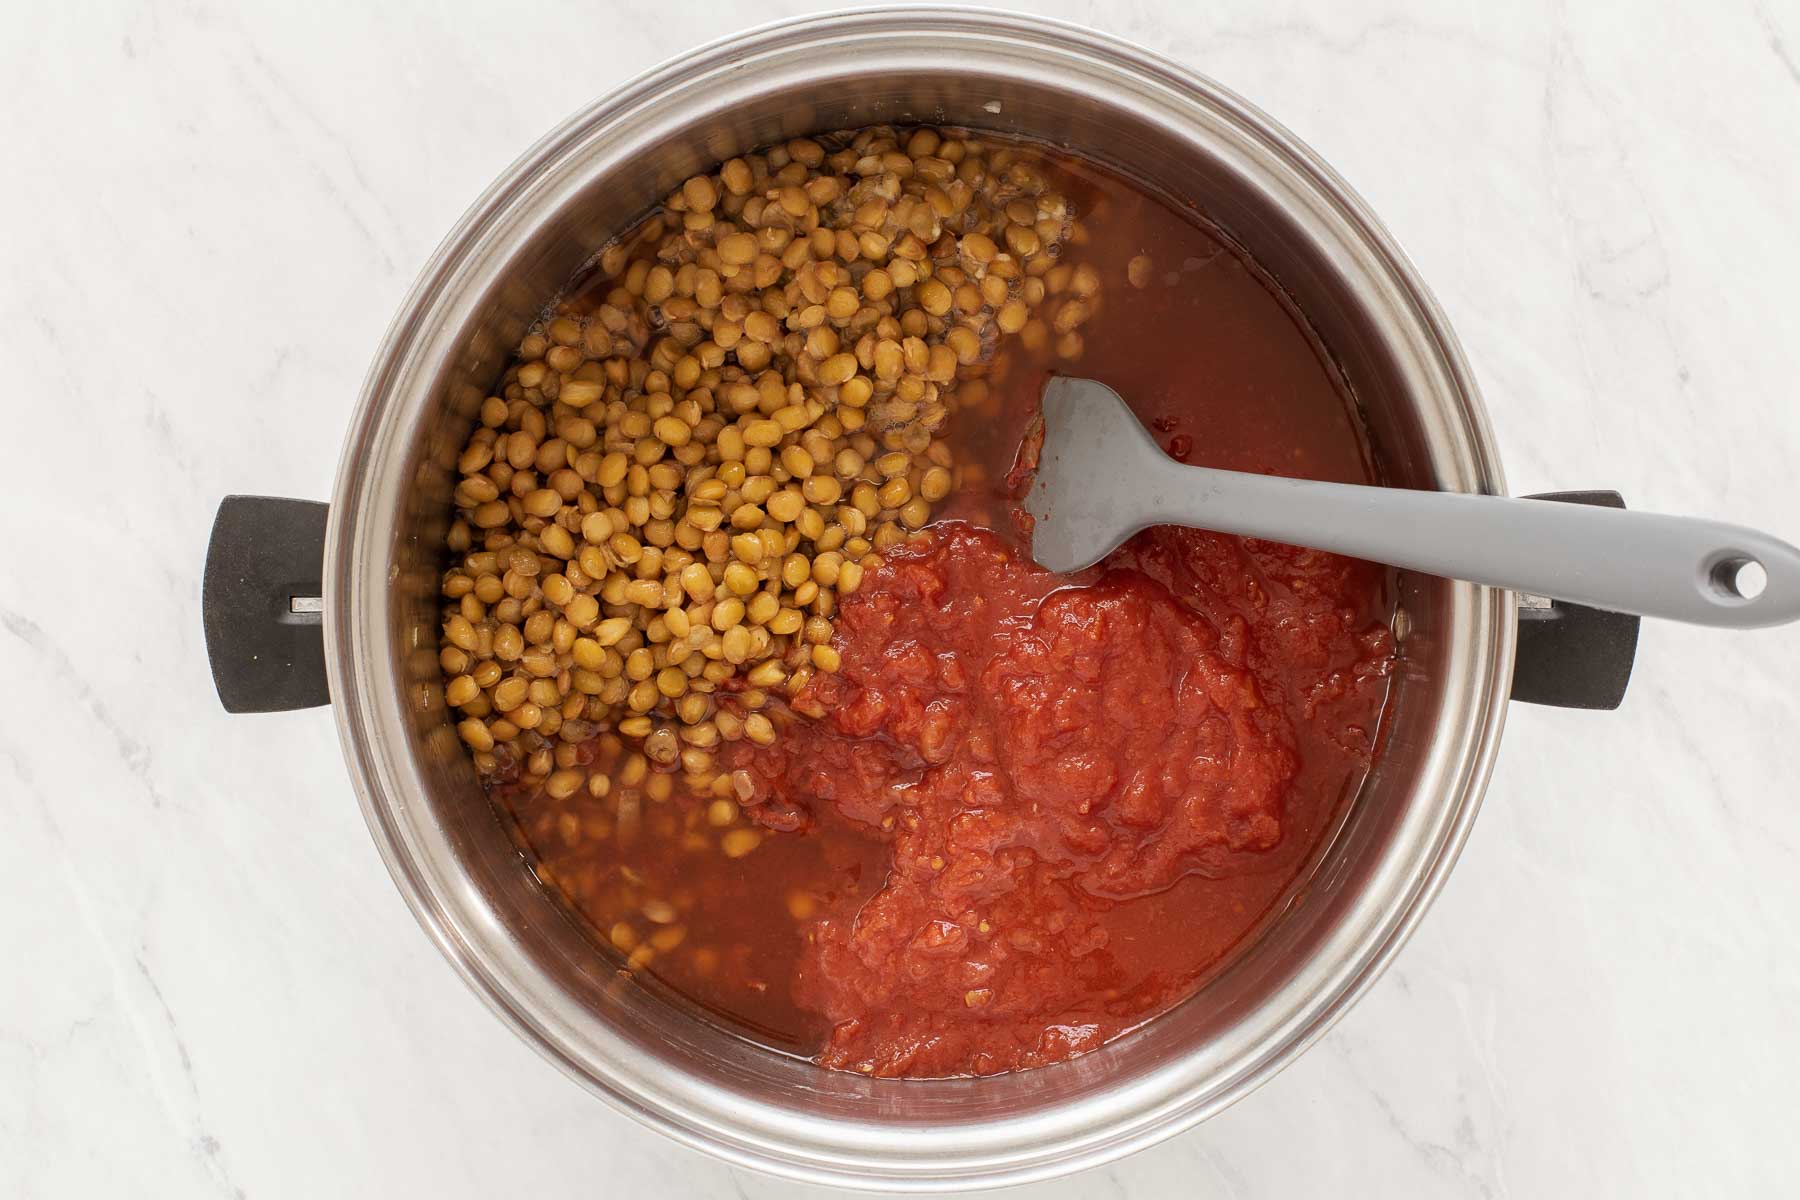 Silver pot with tomato sauce and lentils.